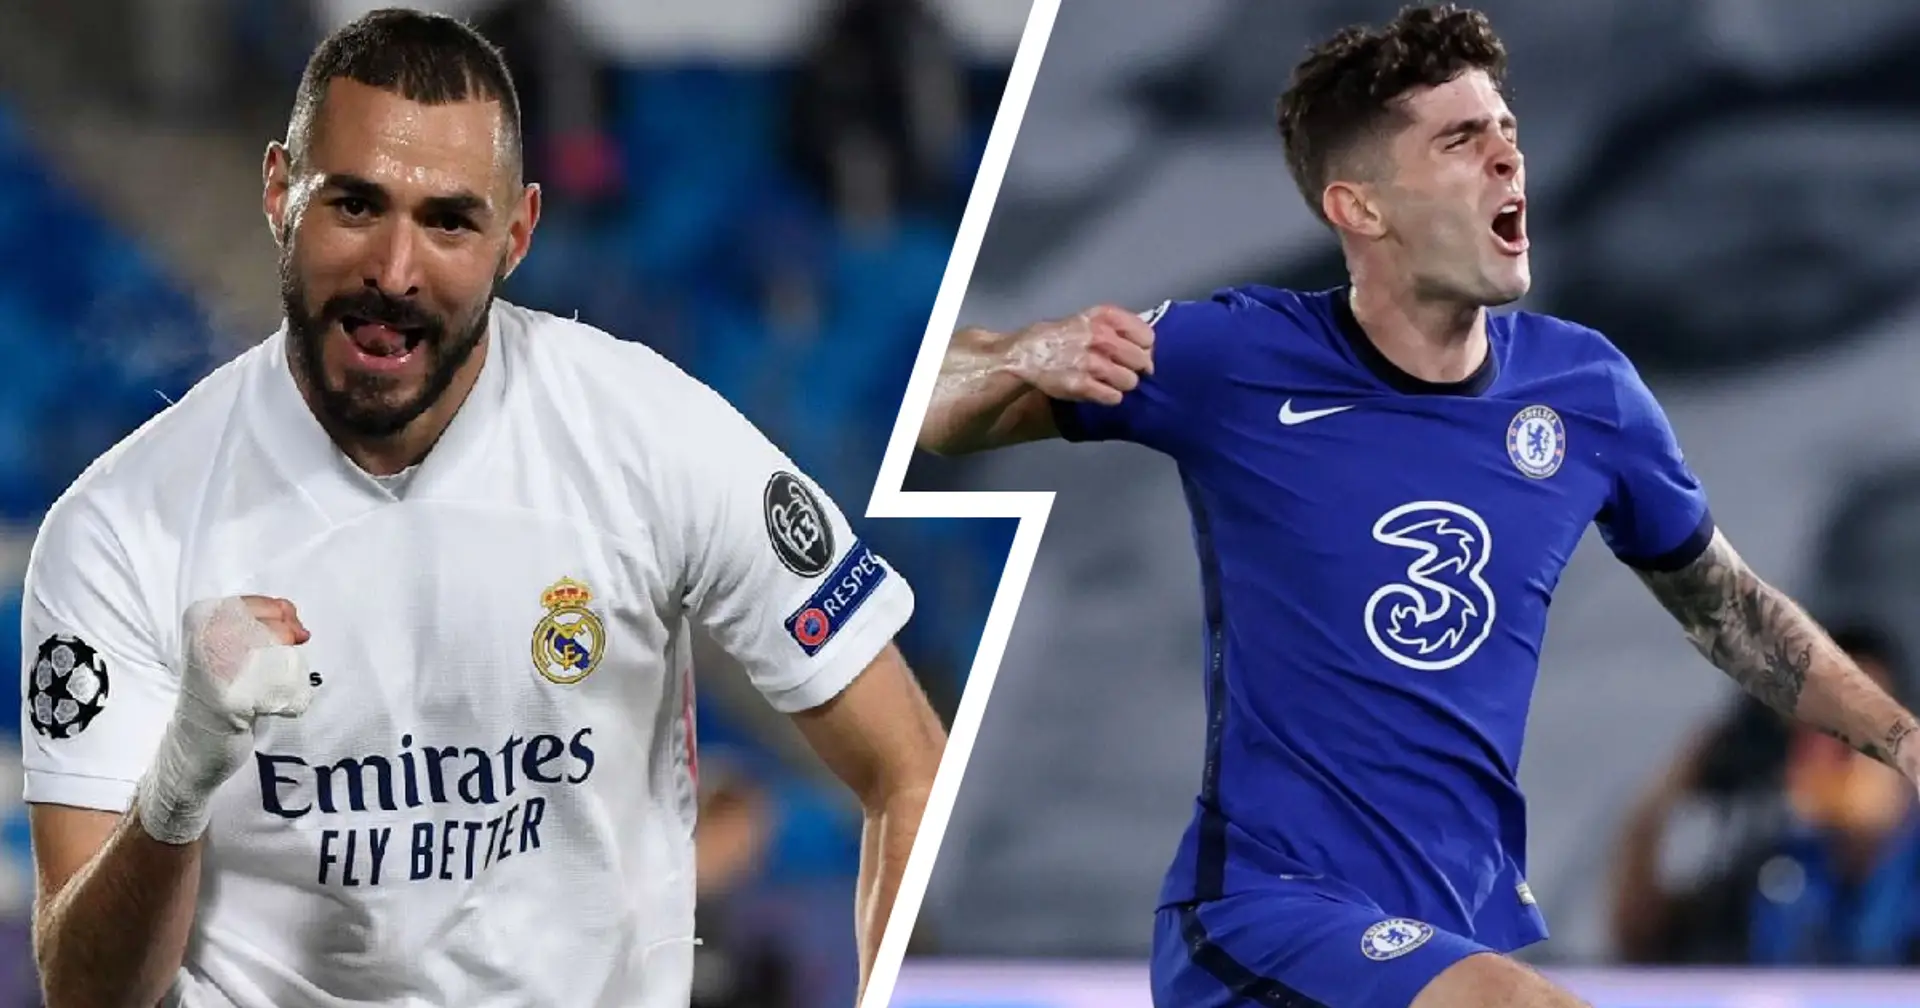 Chelsea vs Real Madrid preview: team news, predicted XI, stats & more